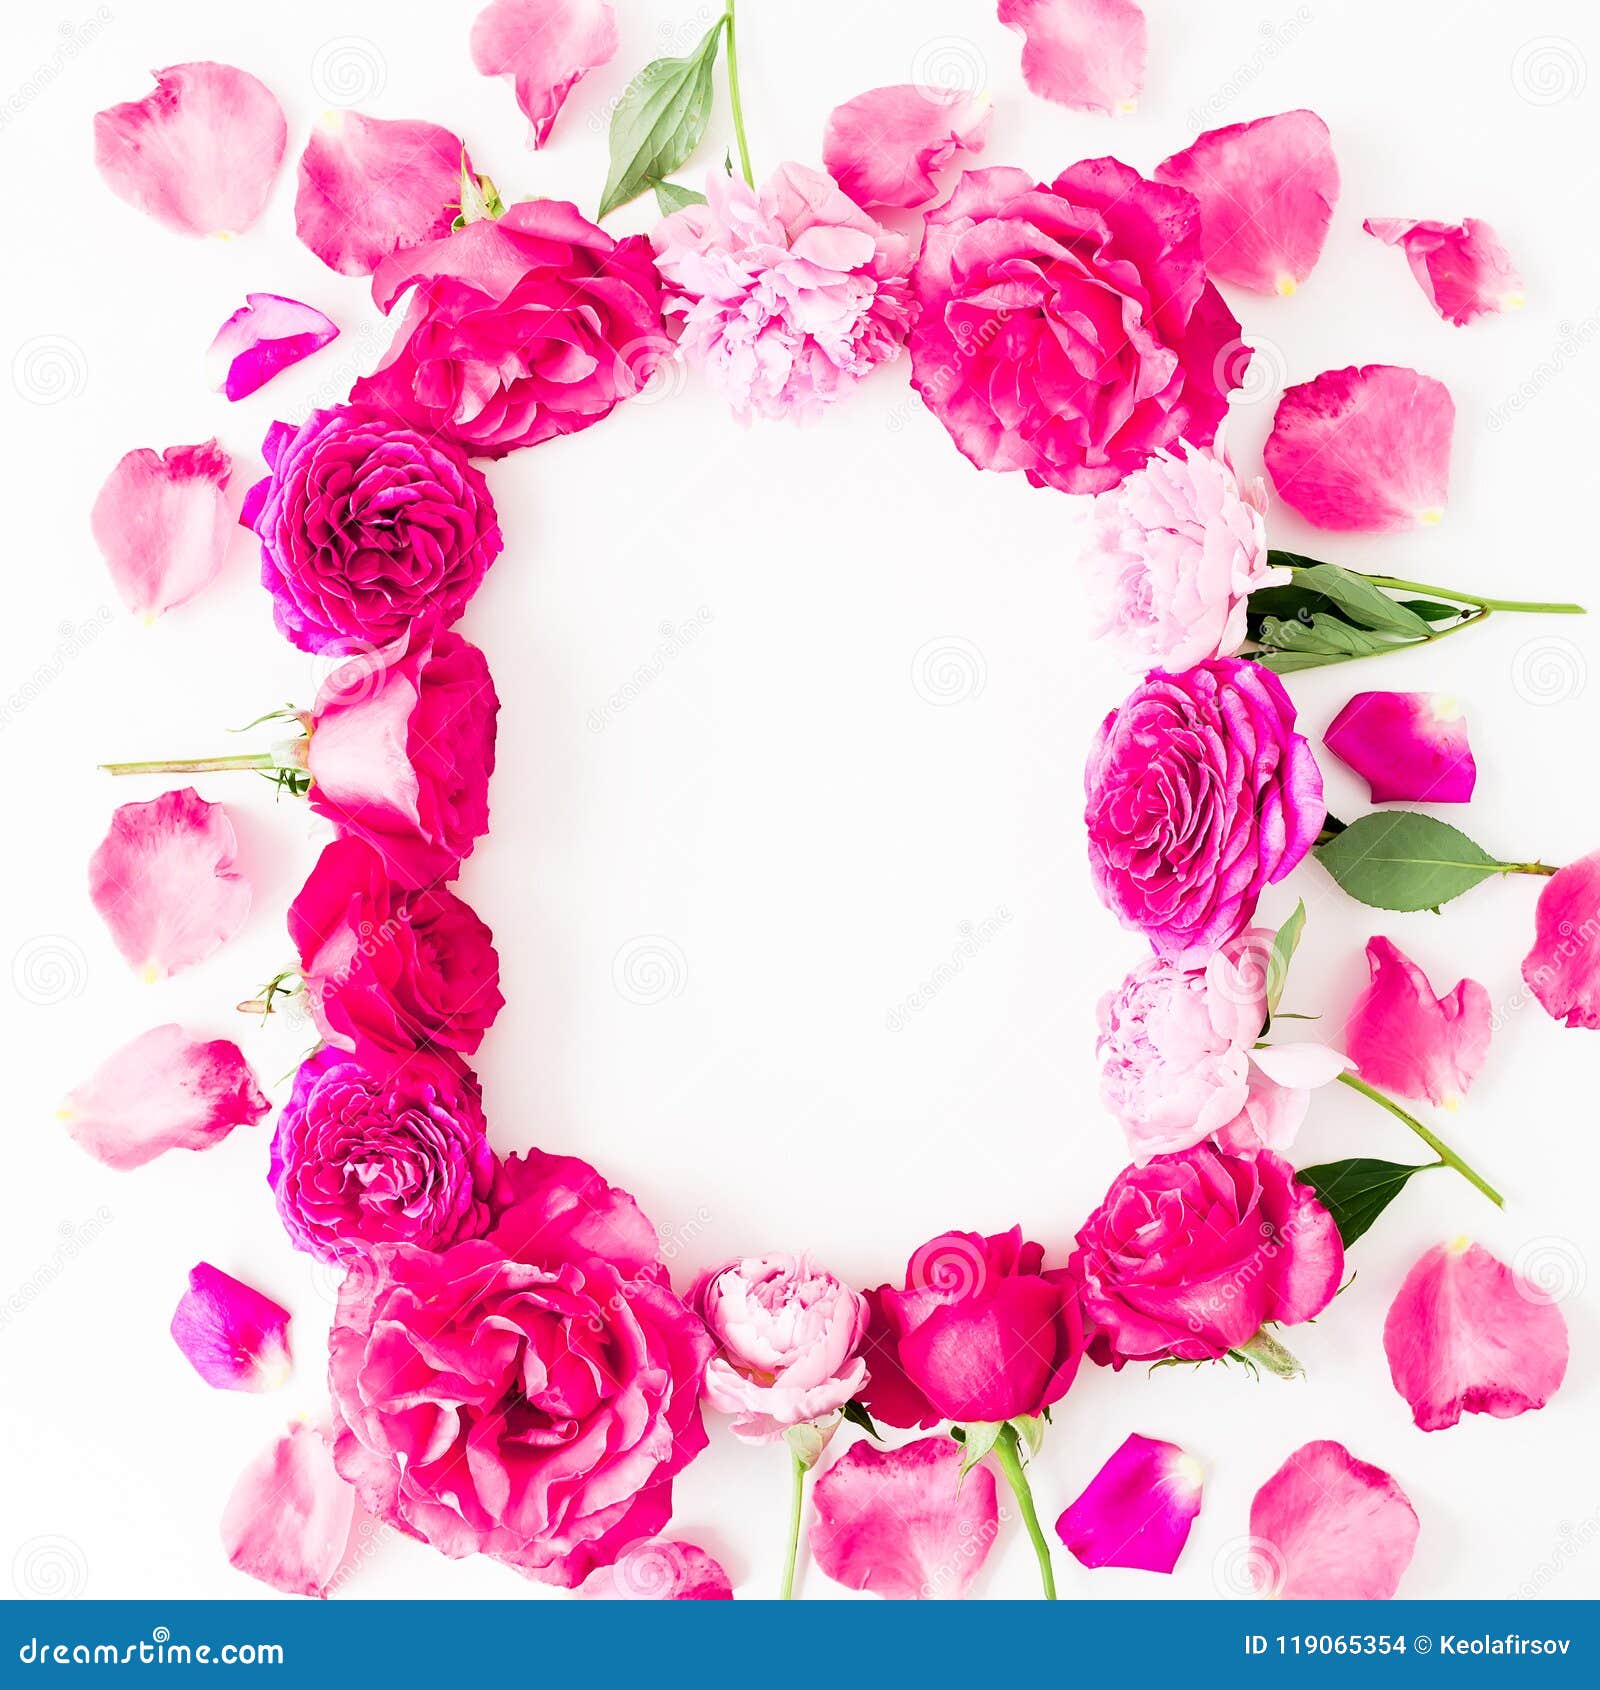 Fresh Pink Rose Petals on White, Top View Stock Photo - Image of natural,  scattered: 173065392